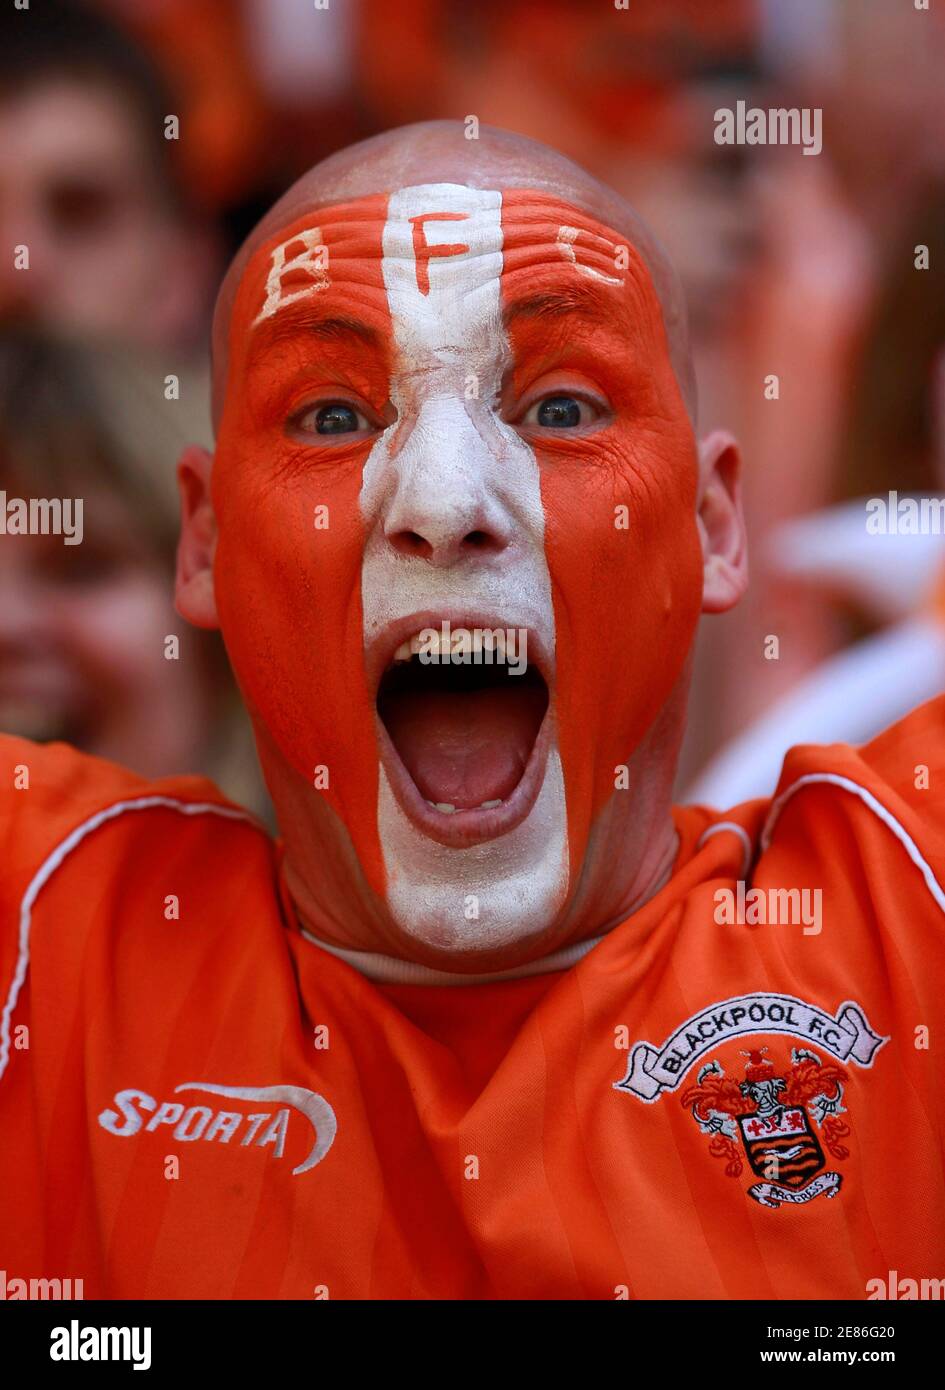 A Blackpool fan celebrates after their English Championship play-off final soccer match victory over Cardiff City at Wembley Stadium in London May 22, 2010. REUTERS/Eddie Keogh  (BRITAIN-Tags: - Tags: SPORT SOCCER) Stock Photo